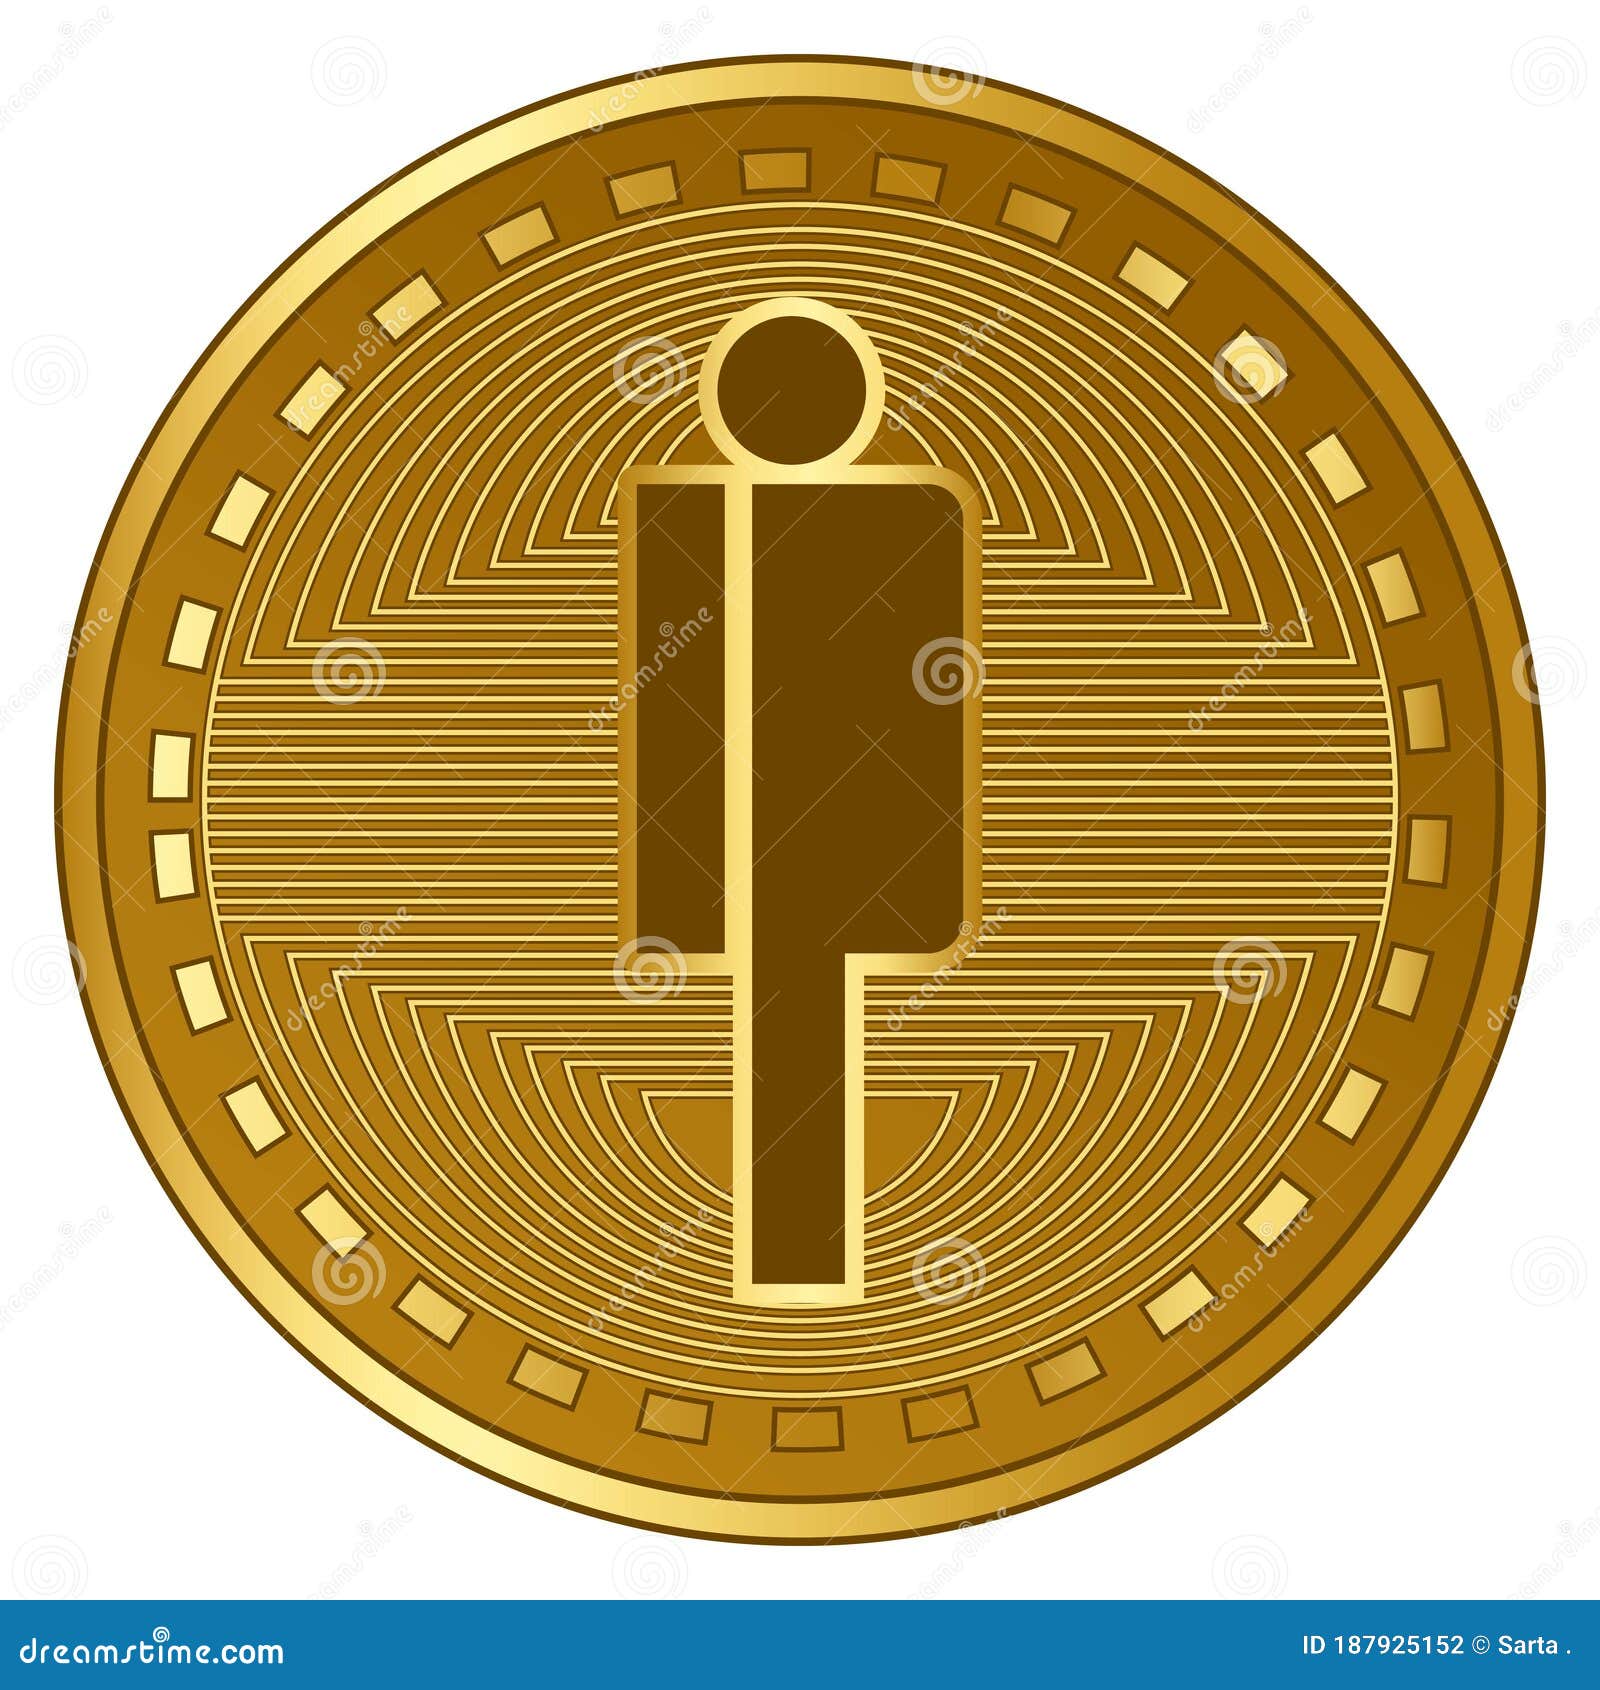 gold futuristic populous cryptocurrency coin  